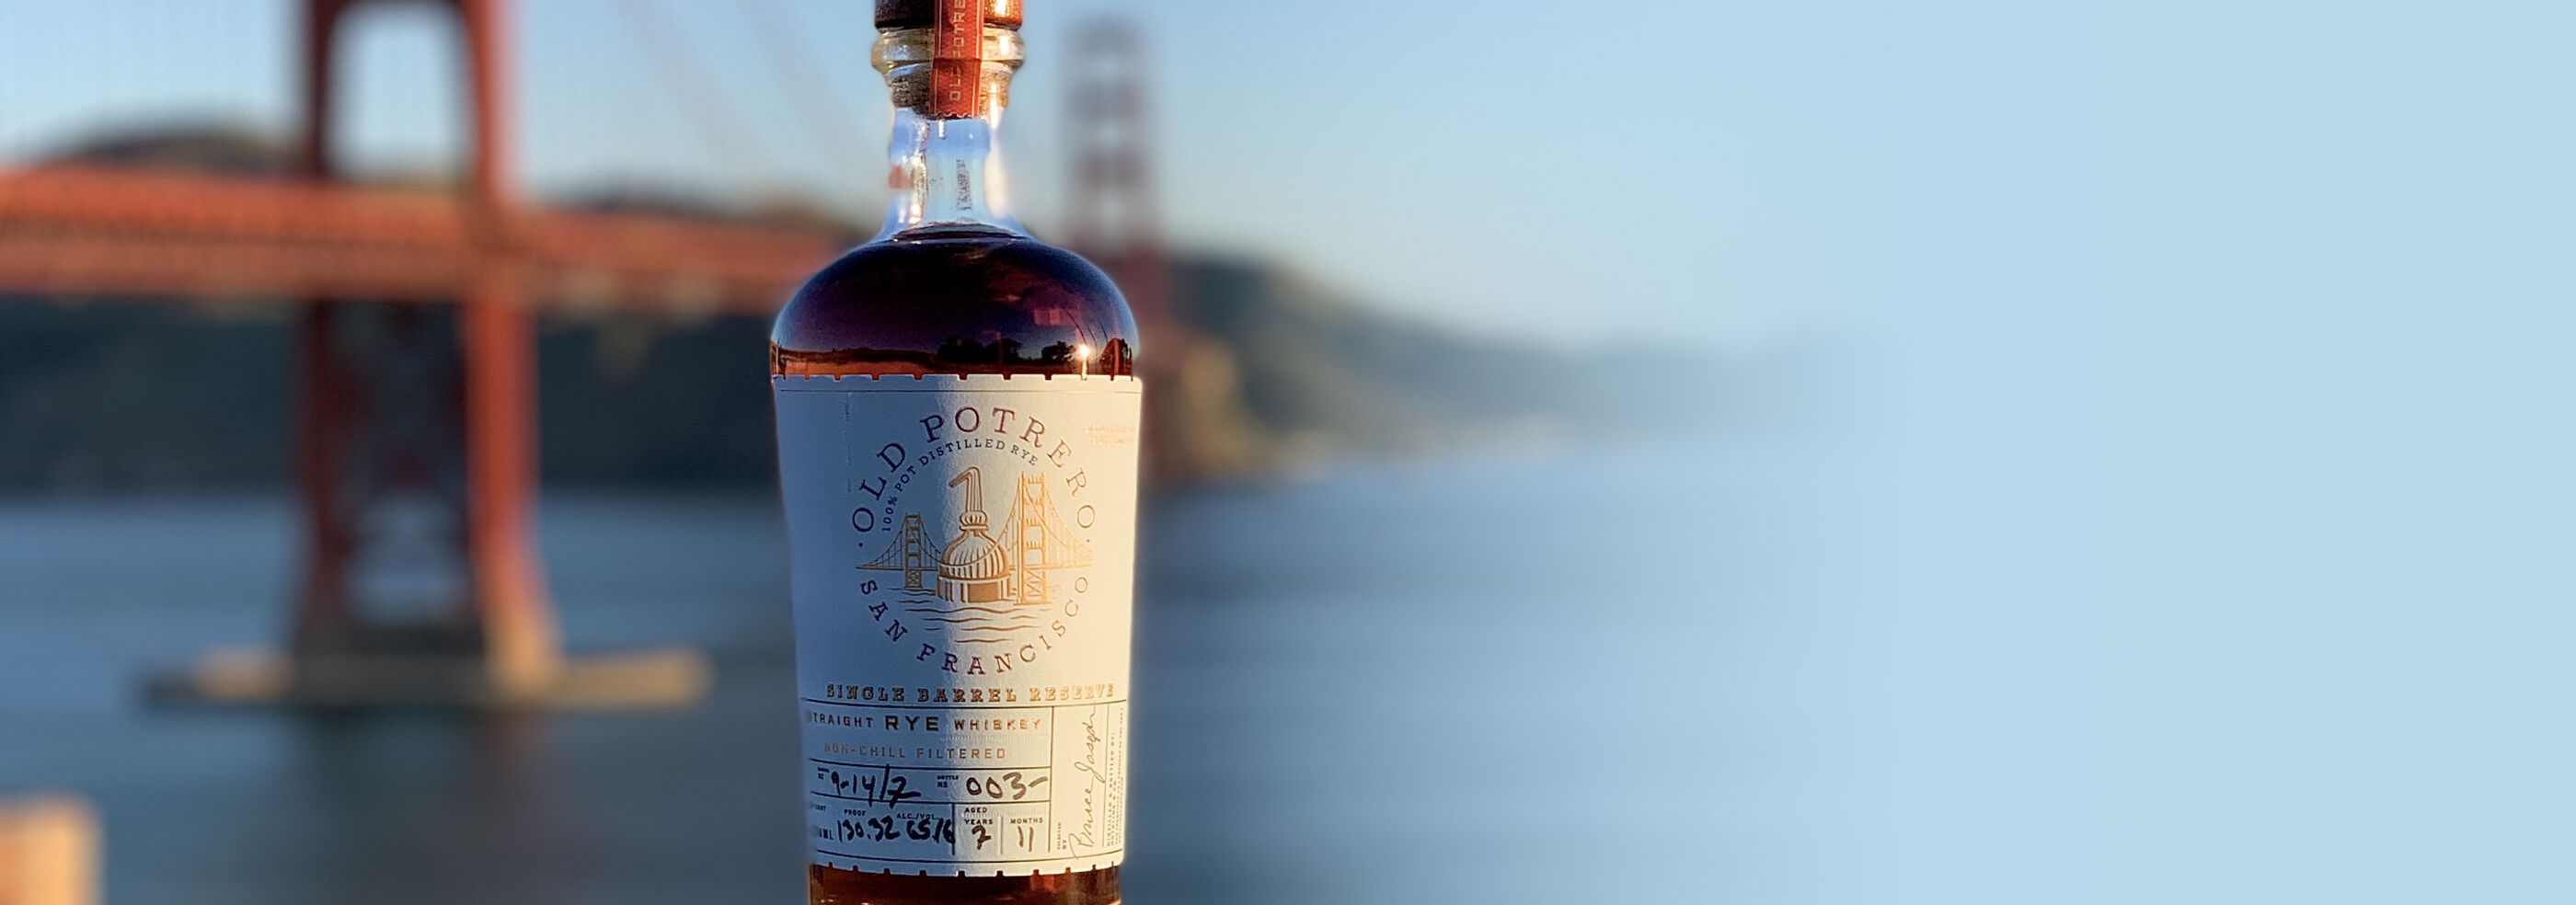 A bottle of Old Potrero Single Barrel Straight Rye Whiskey S1B45 in front of the Golden Gate Bridge